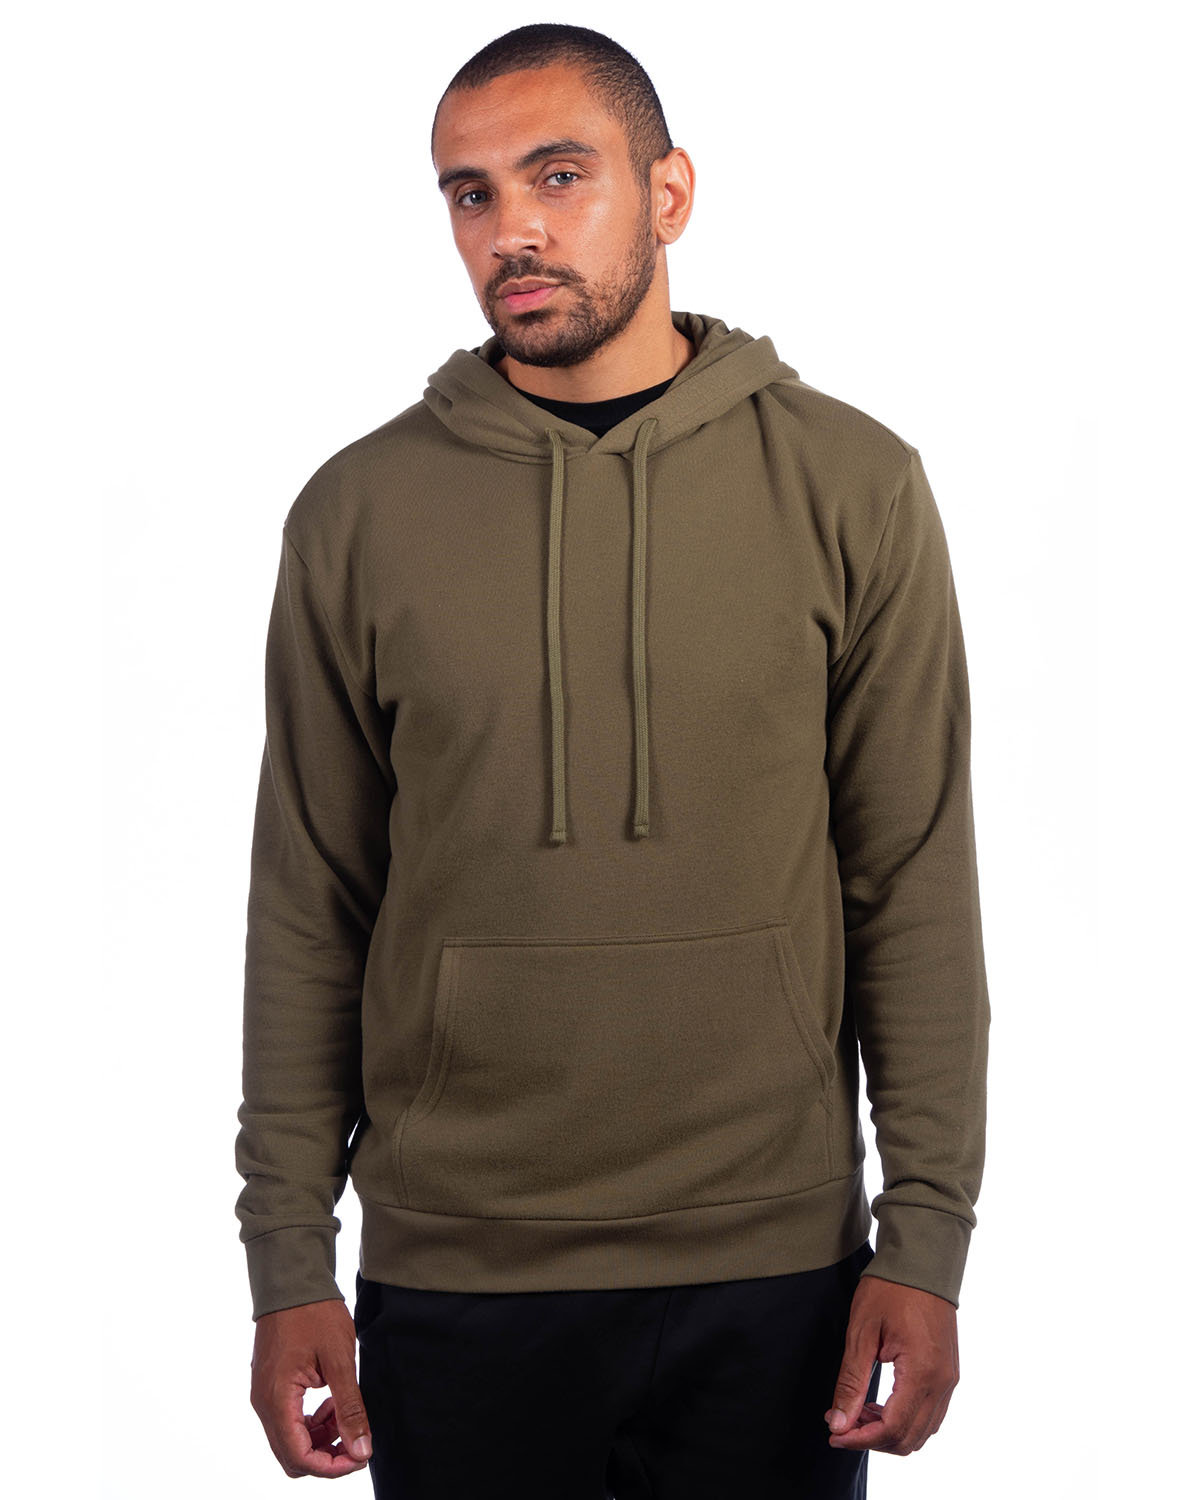 Next Level Adult Sueded French Terry Pullover Sweatshirt MILITARY GREEN 